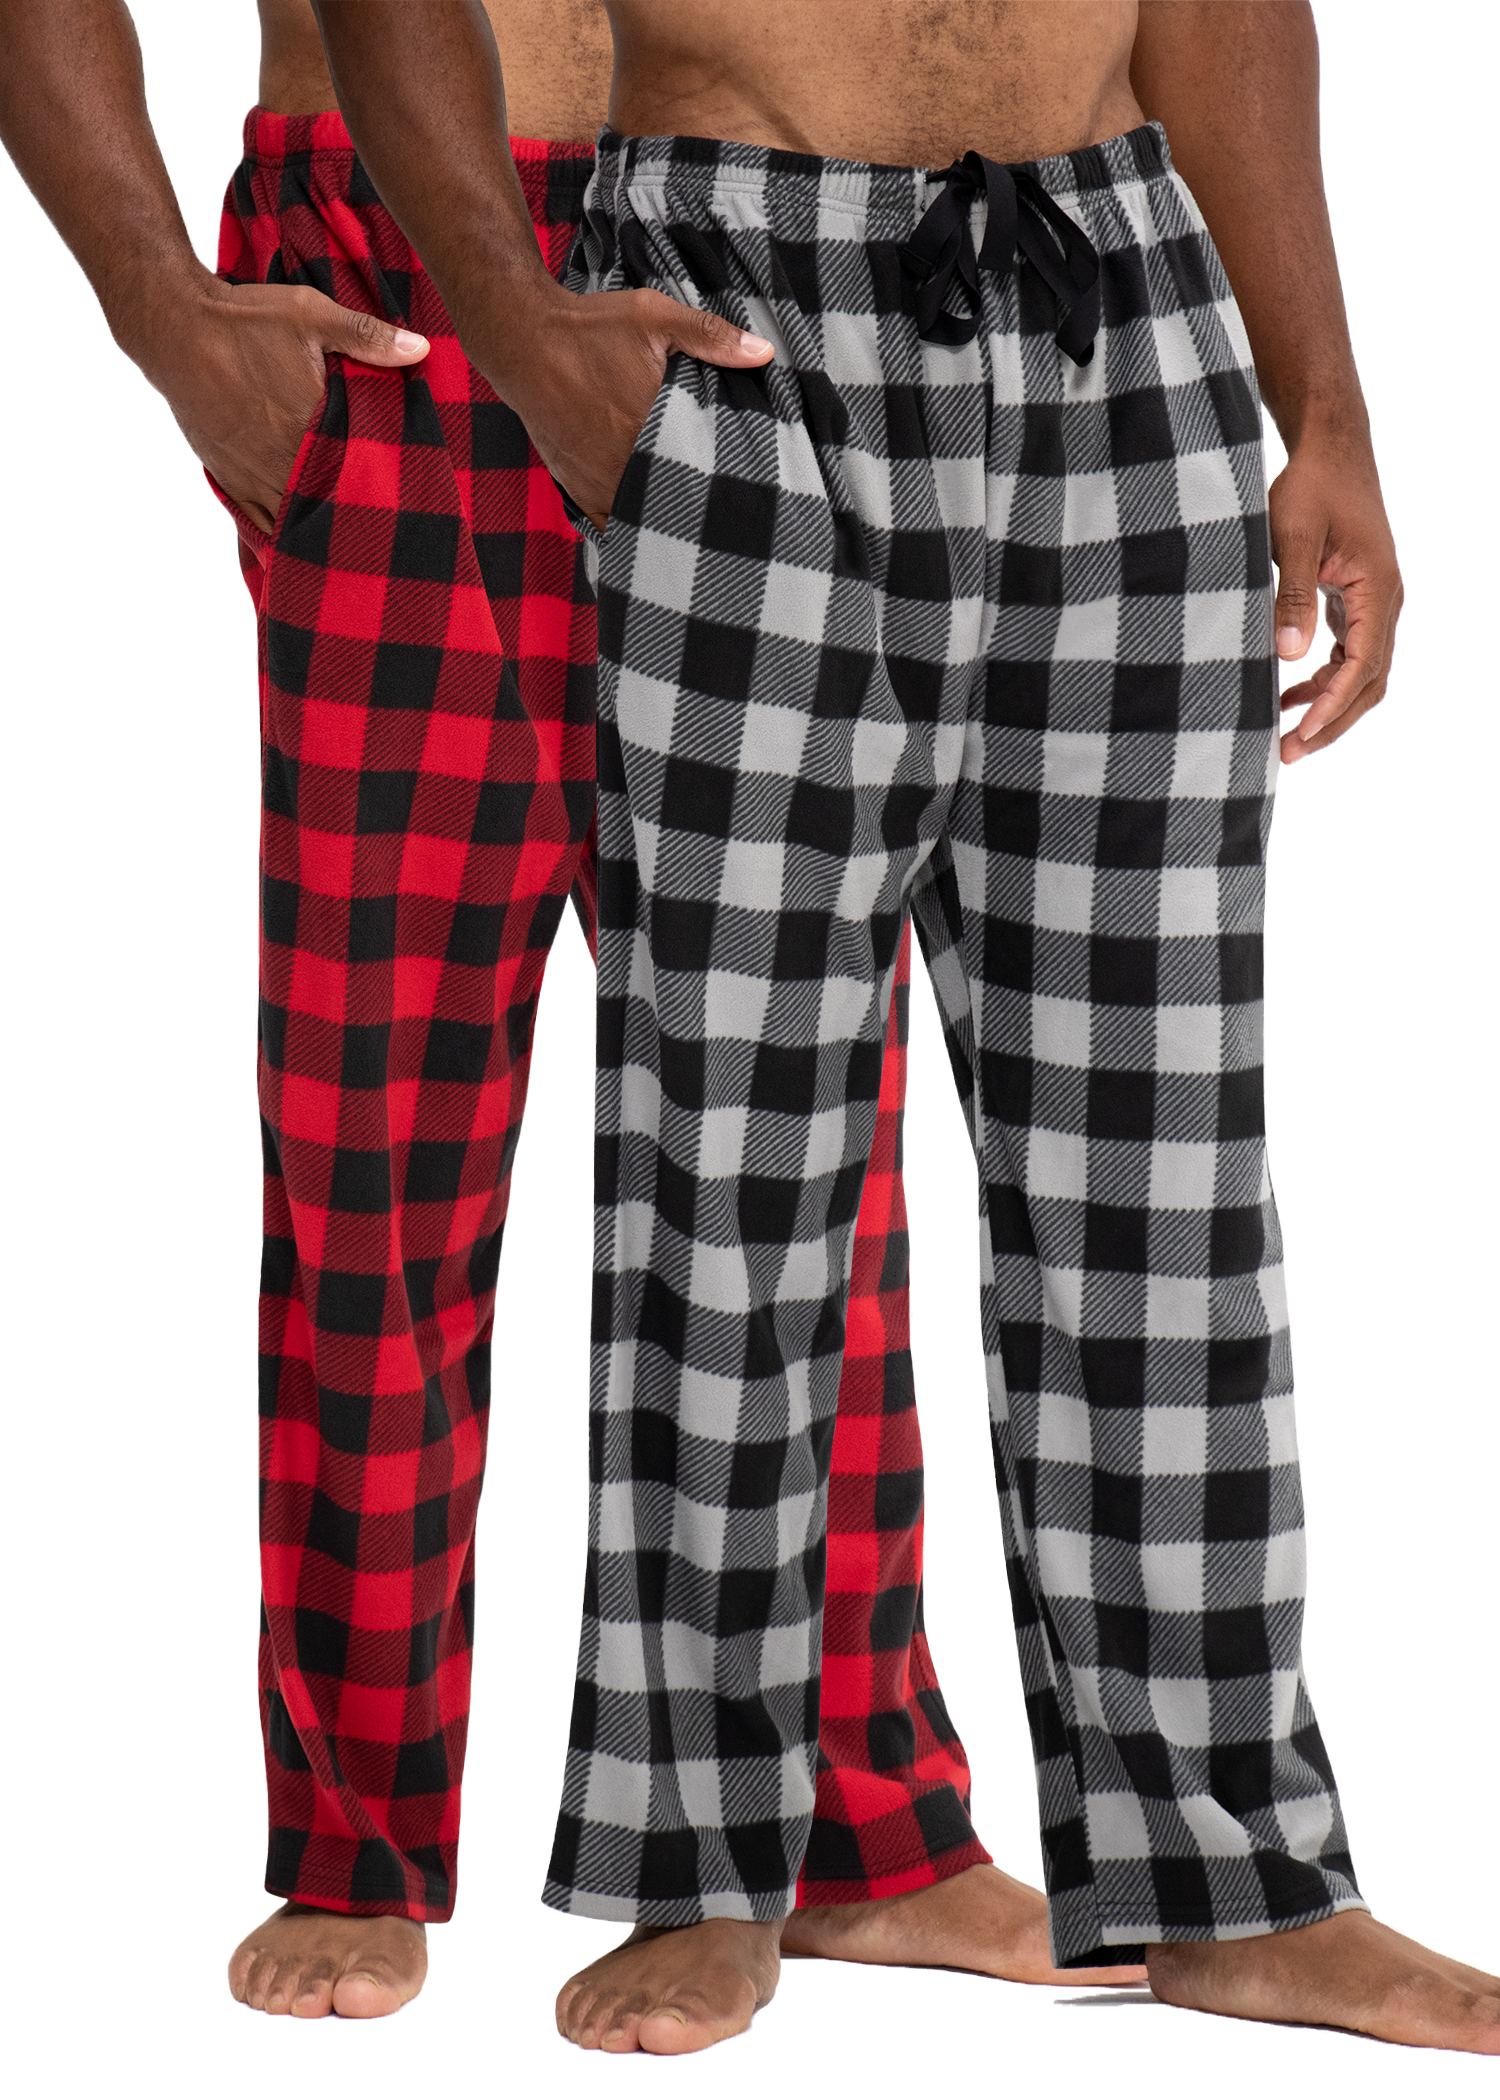 Red Union Suit Sleeper Pajamas with Funny Rear Flap 